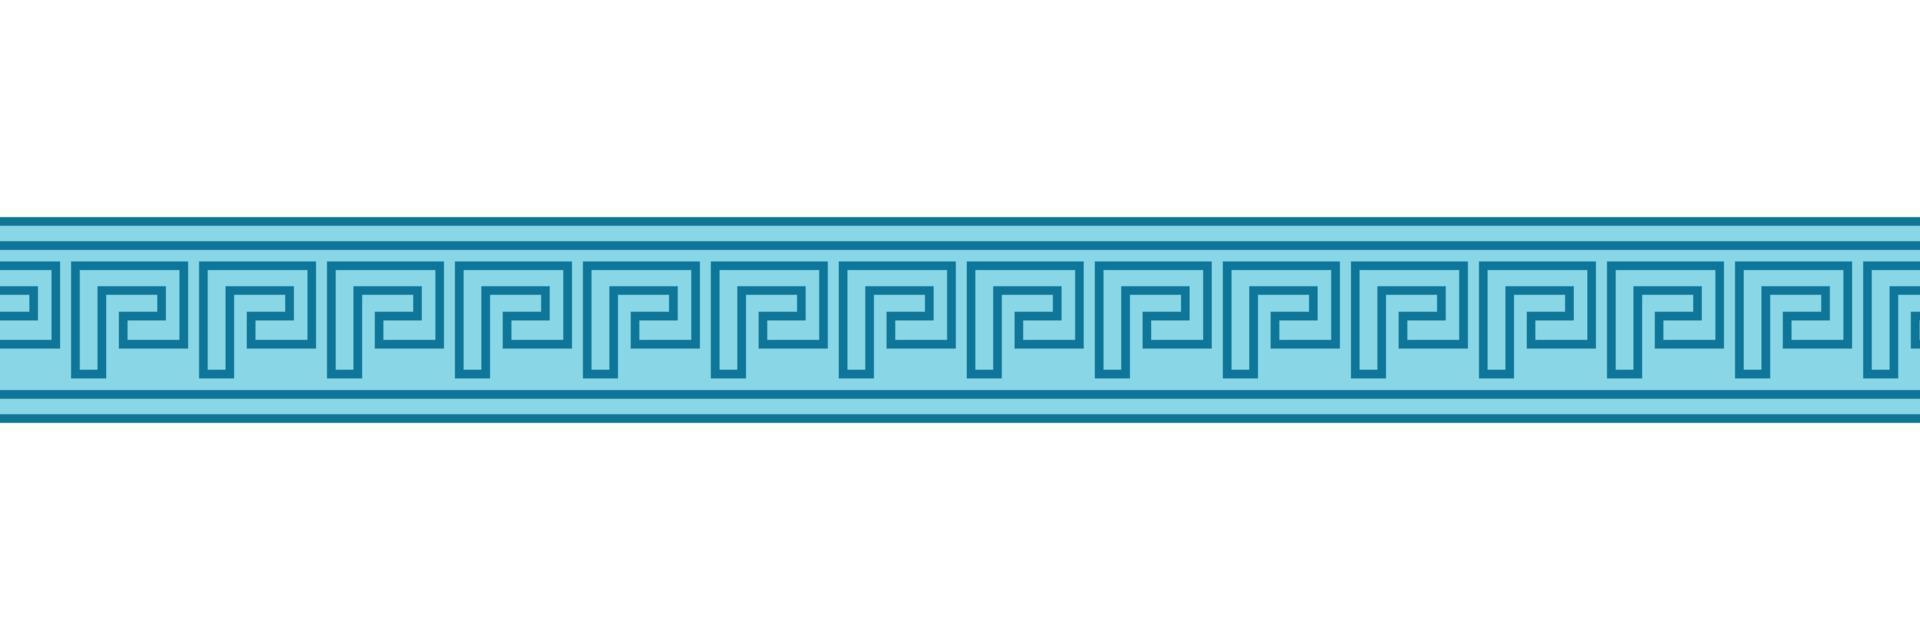 Seamless meander patterns. Greek meandros, fret or key. Ornament for Acient Greece style borders. Vector illustration